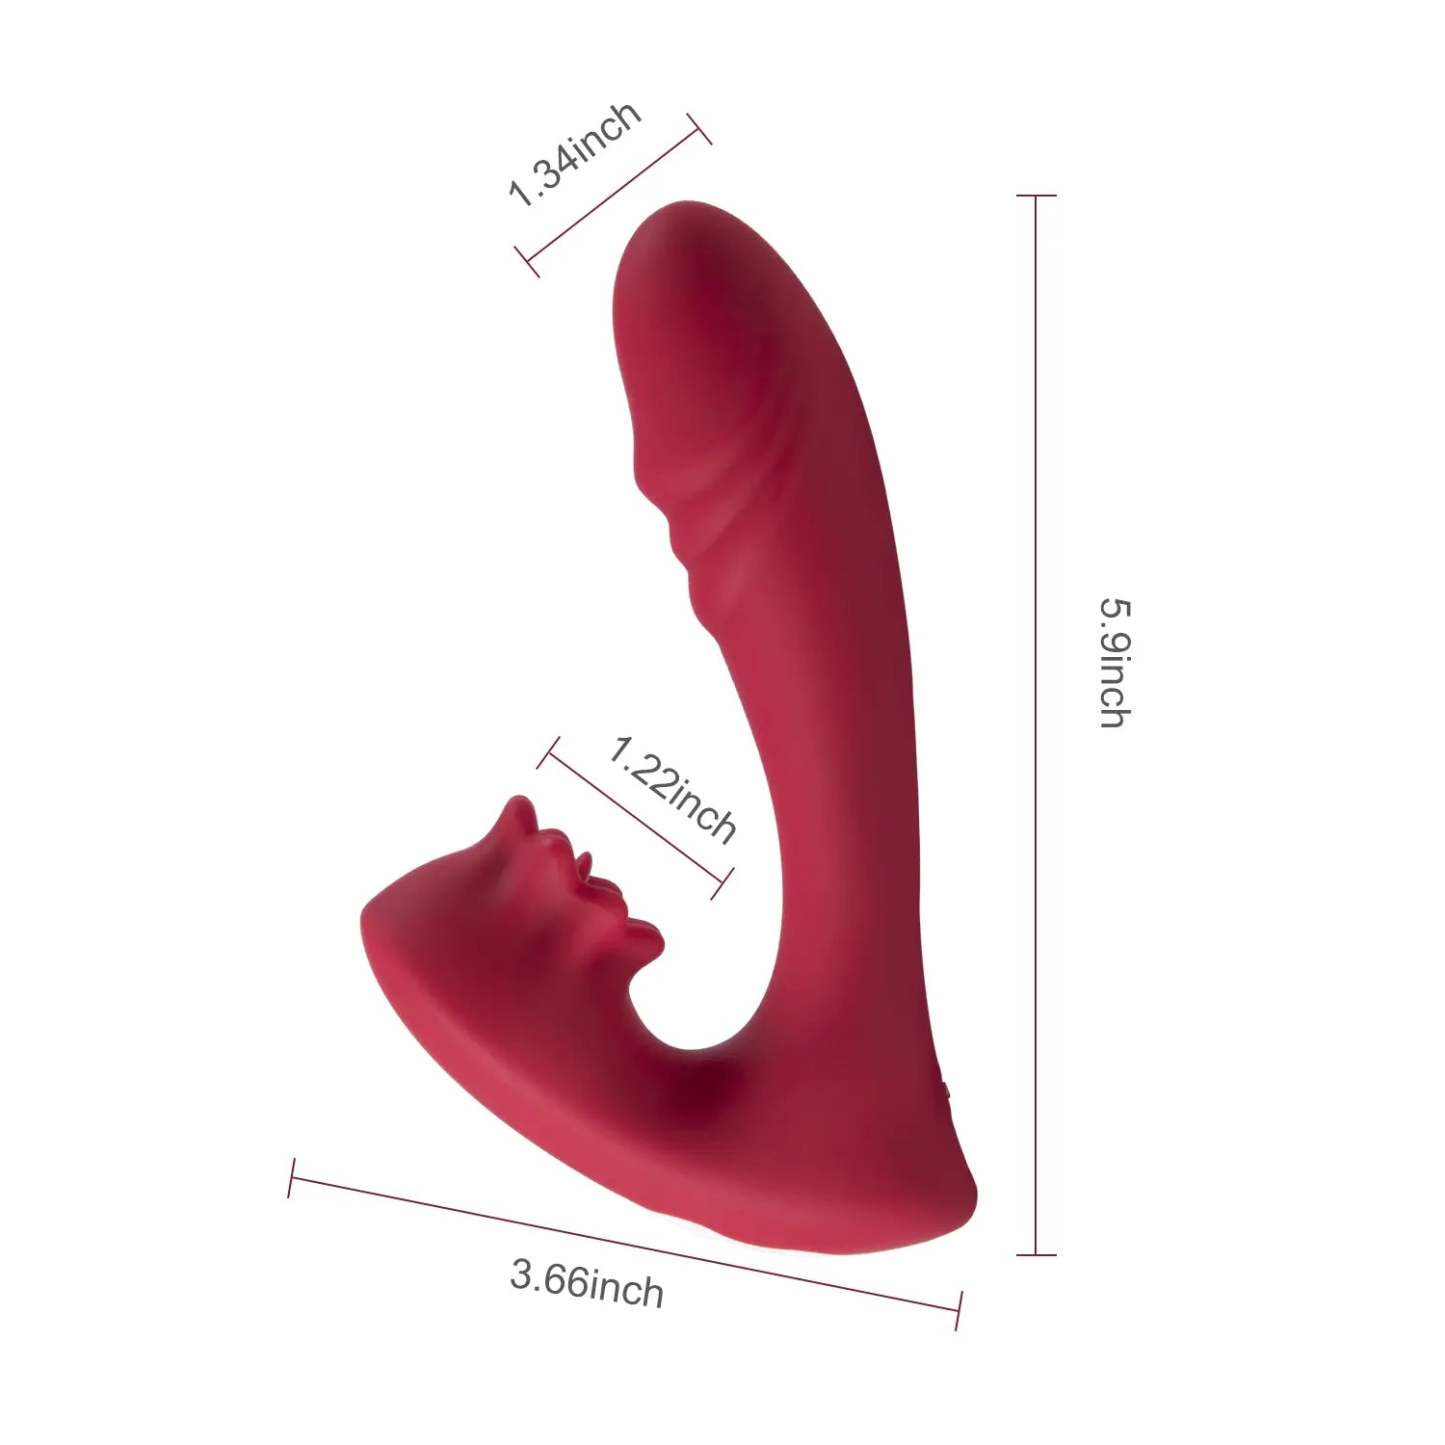 Lacy G-Spot Vibrator with Clit-Licking Tongue - Intense Pleasure Delivered-BestGSpot